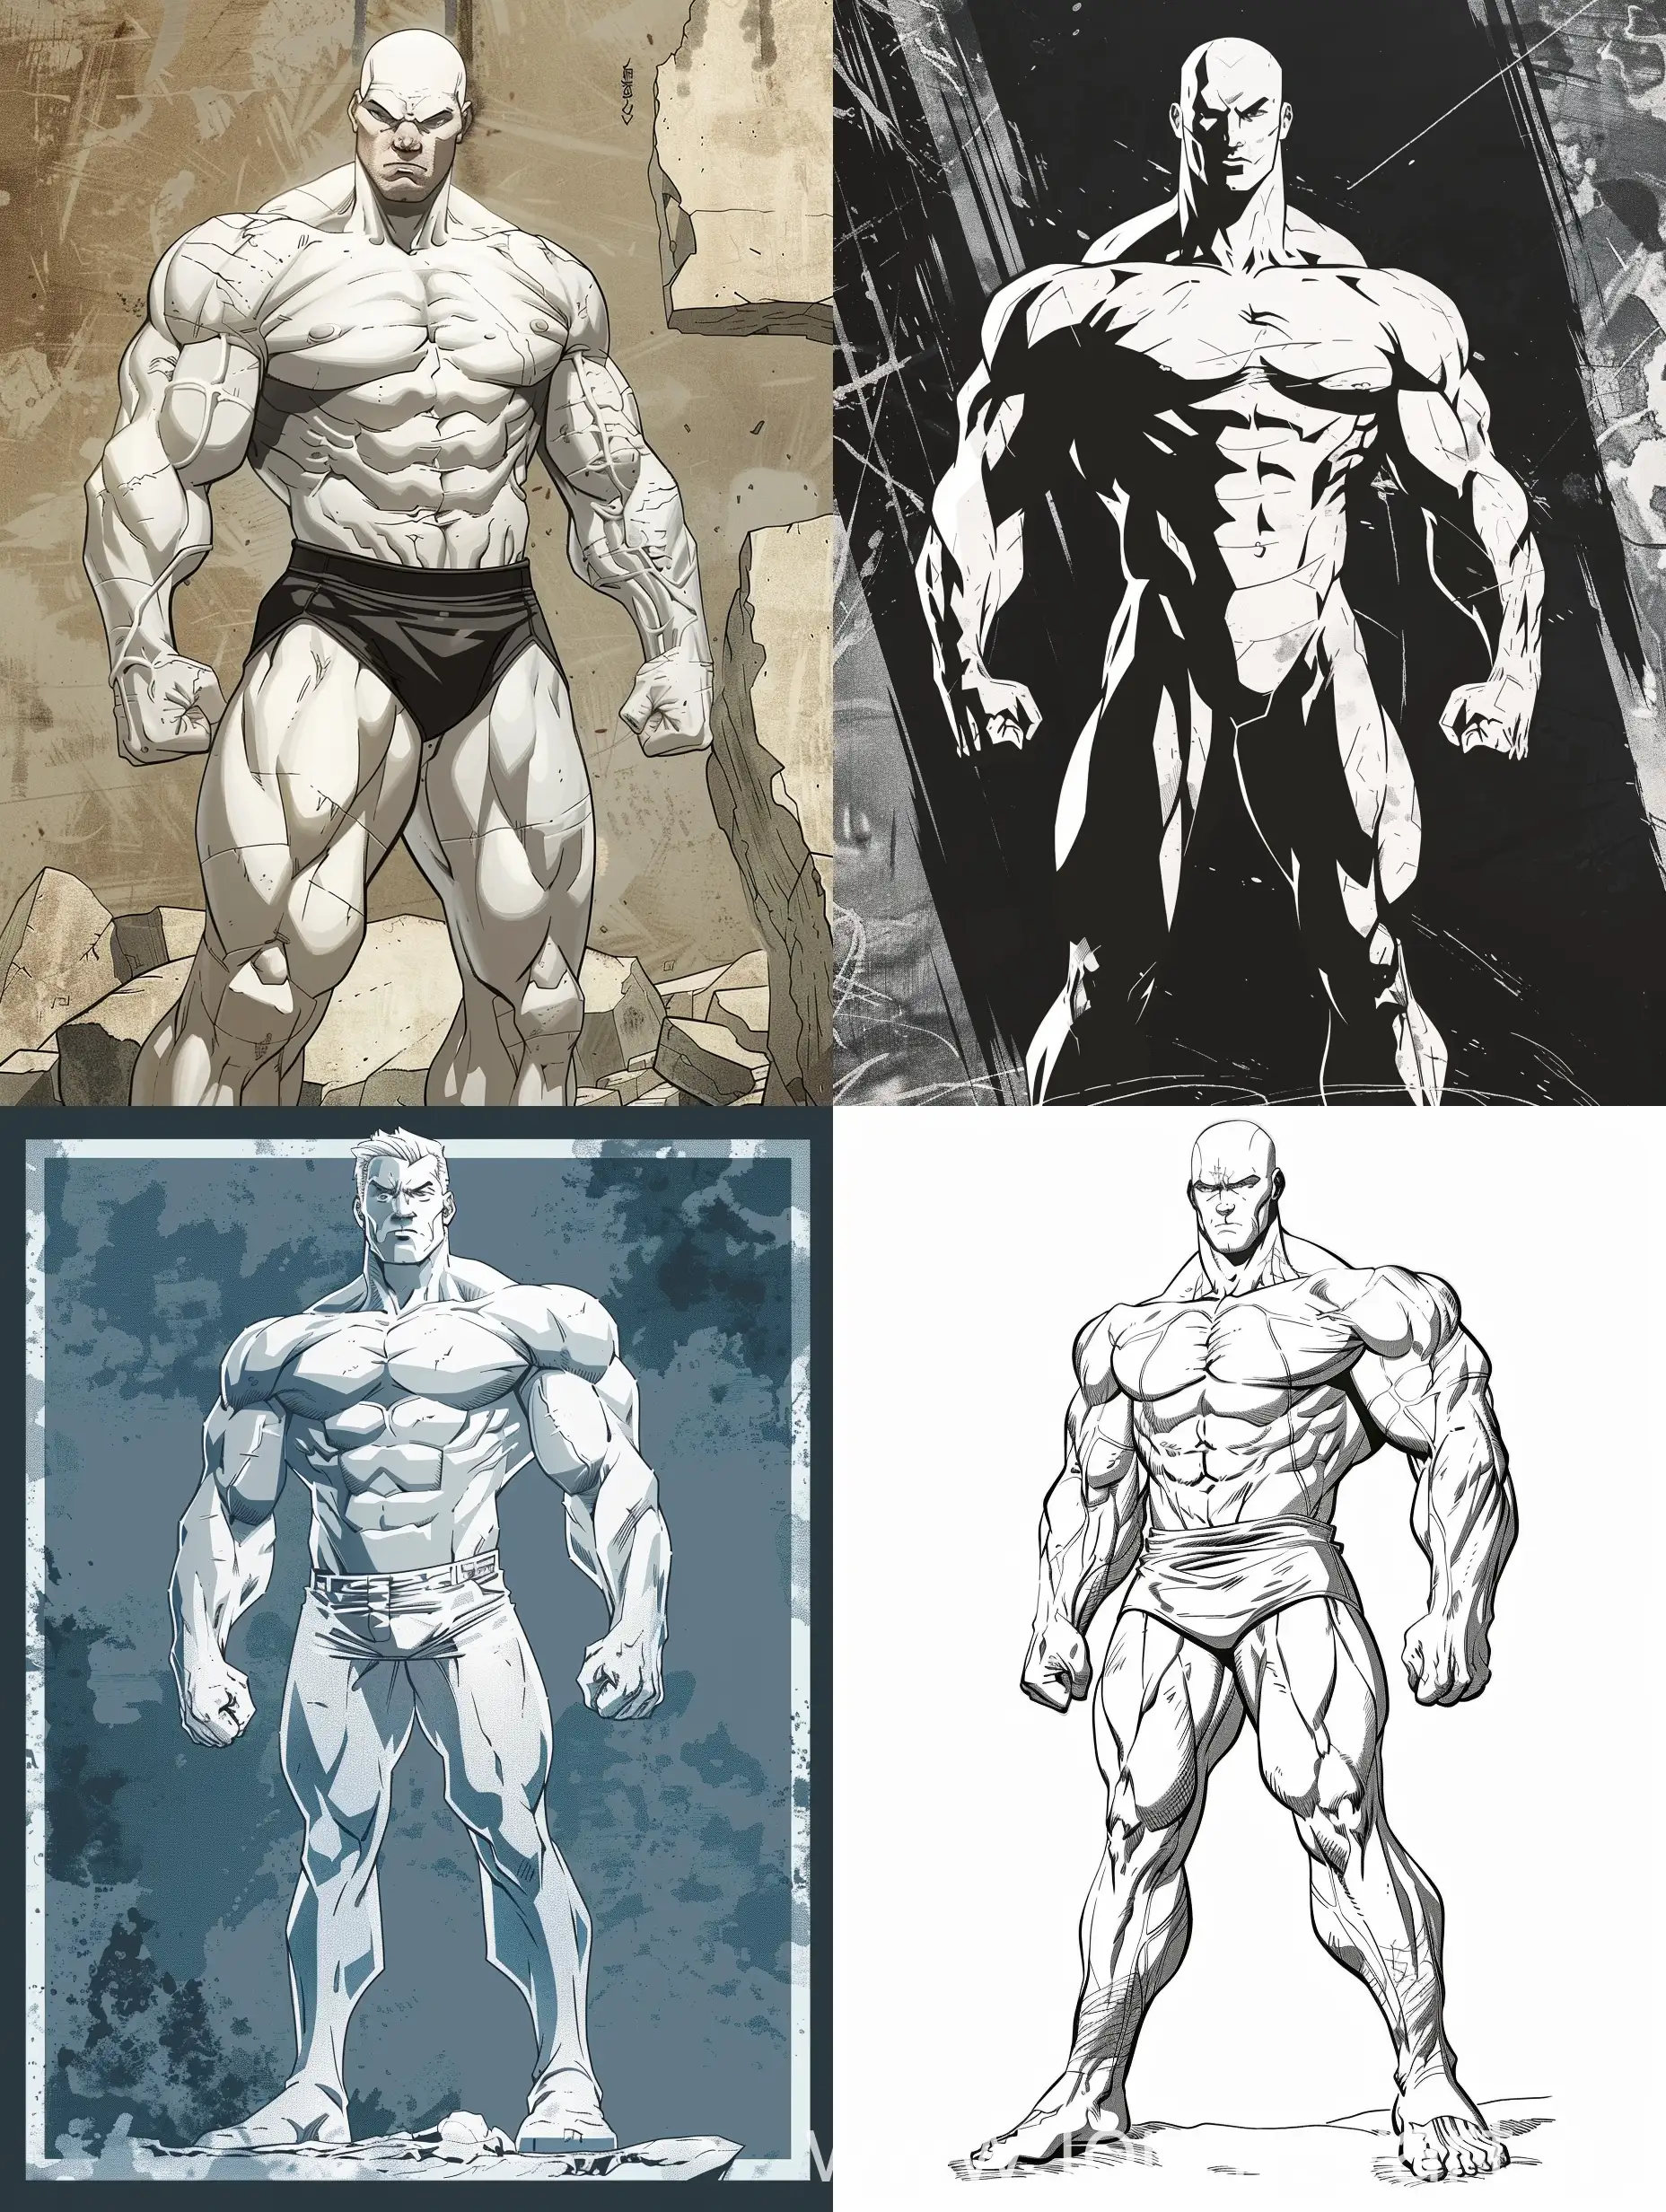 /imagine prompt: muscular strong short man in comix style with pure very white skin, full body pose